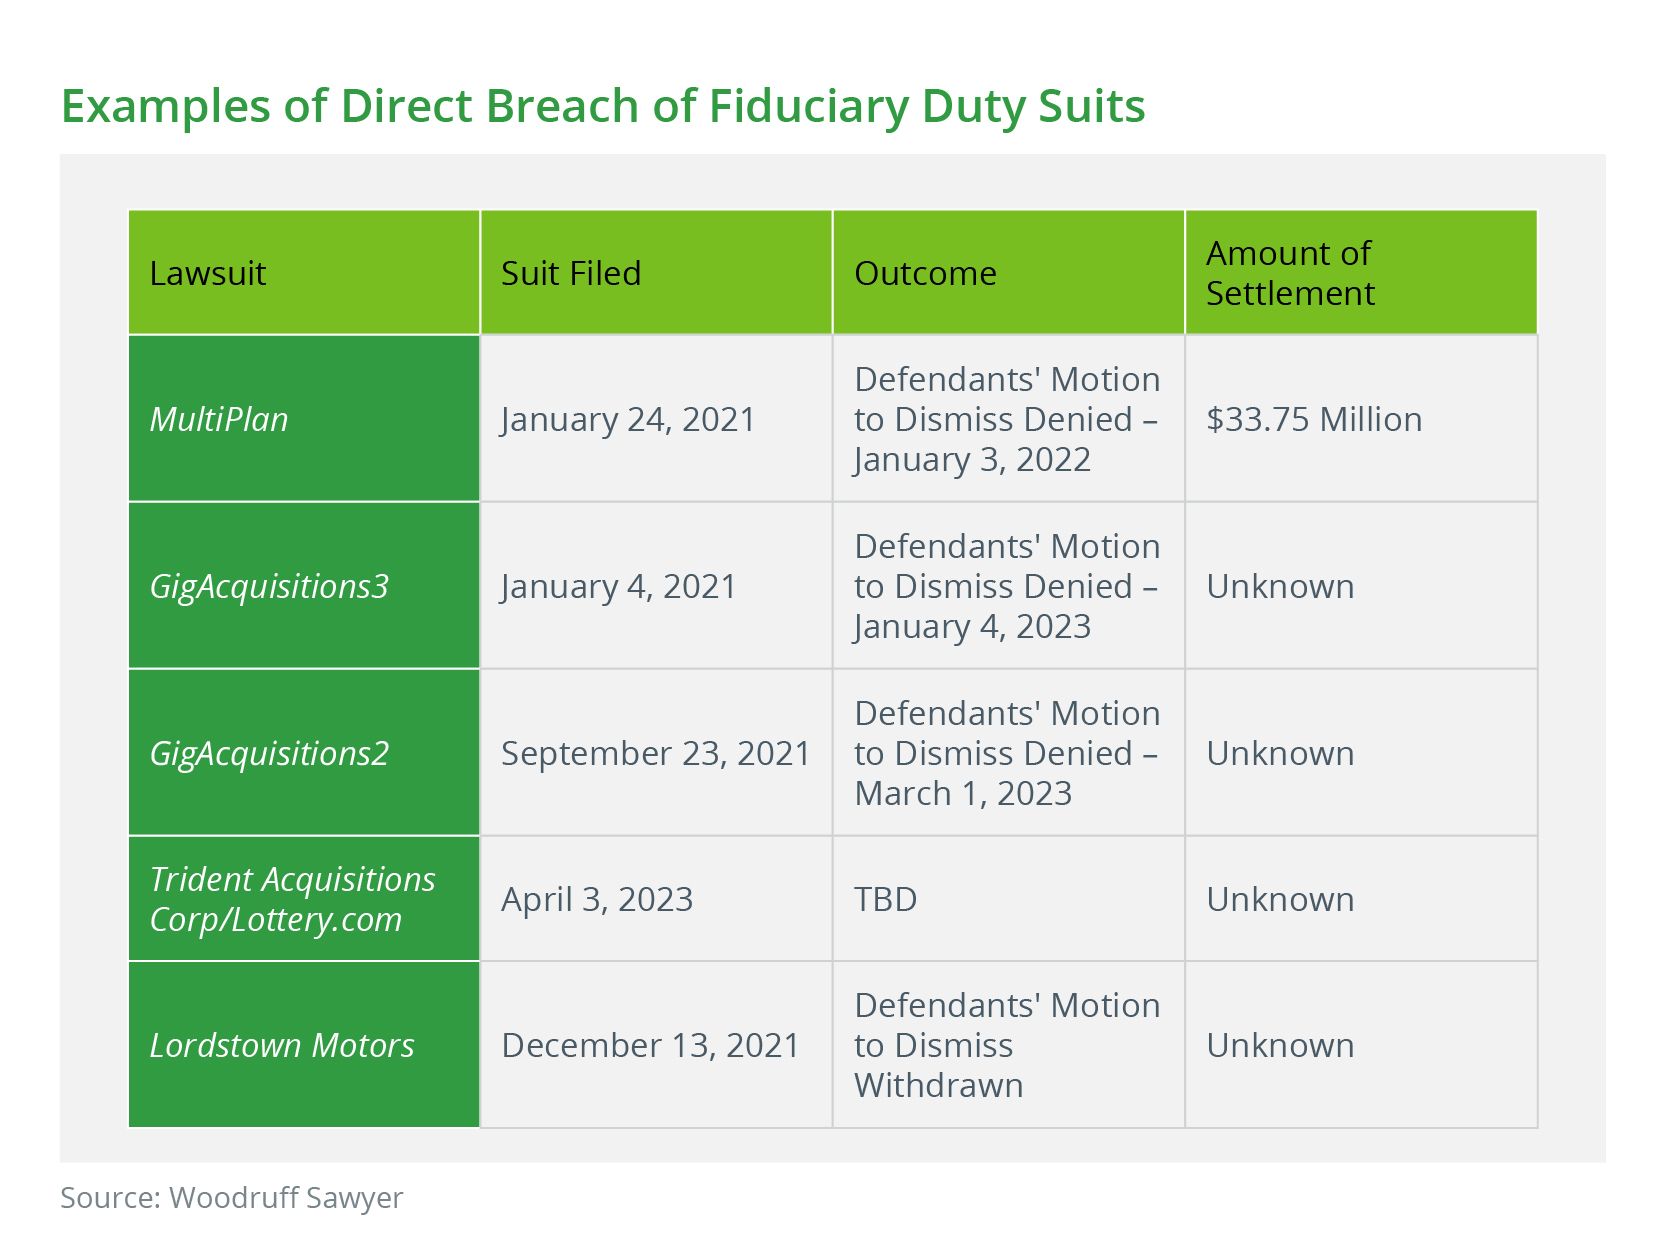 Examples of Direct Breach of Fiduciary Duty Suits